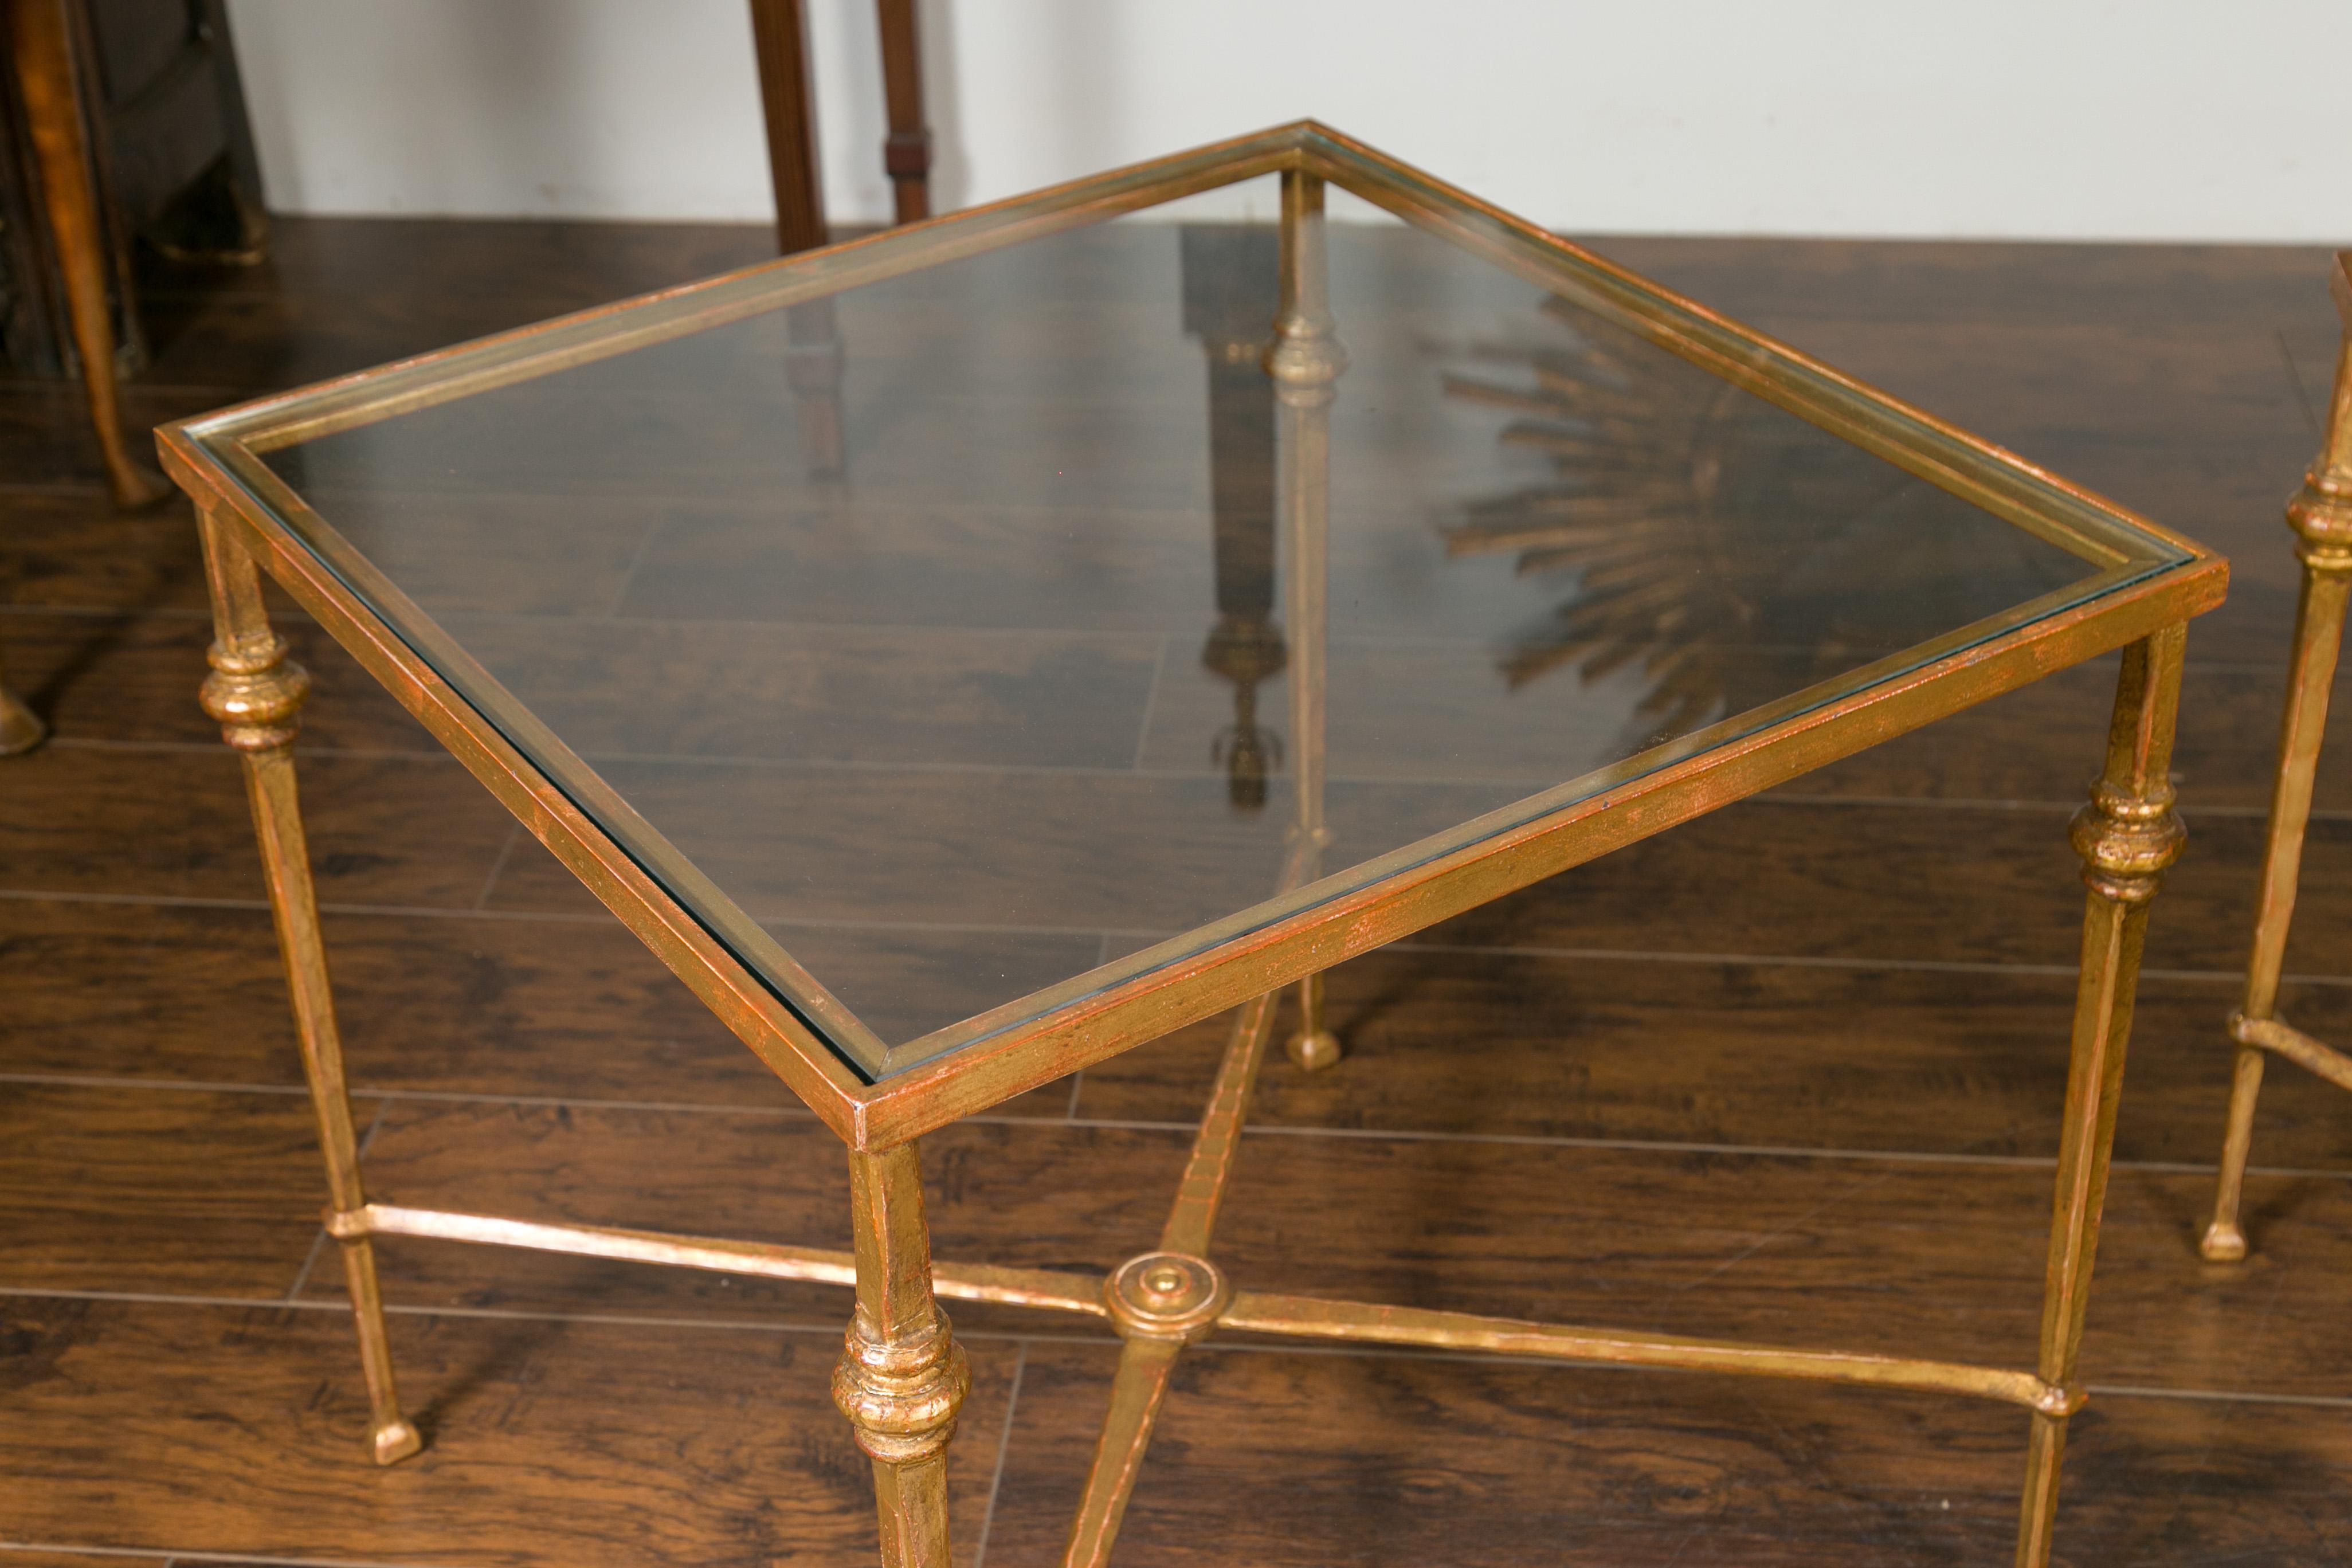 20th Century Pair of Midcentury Gilt Iron Side Tables with Glass Tops and Cross Stretchers